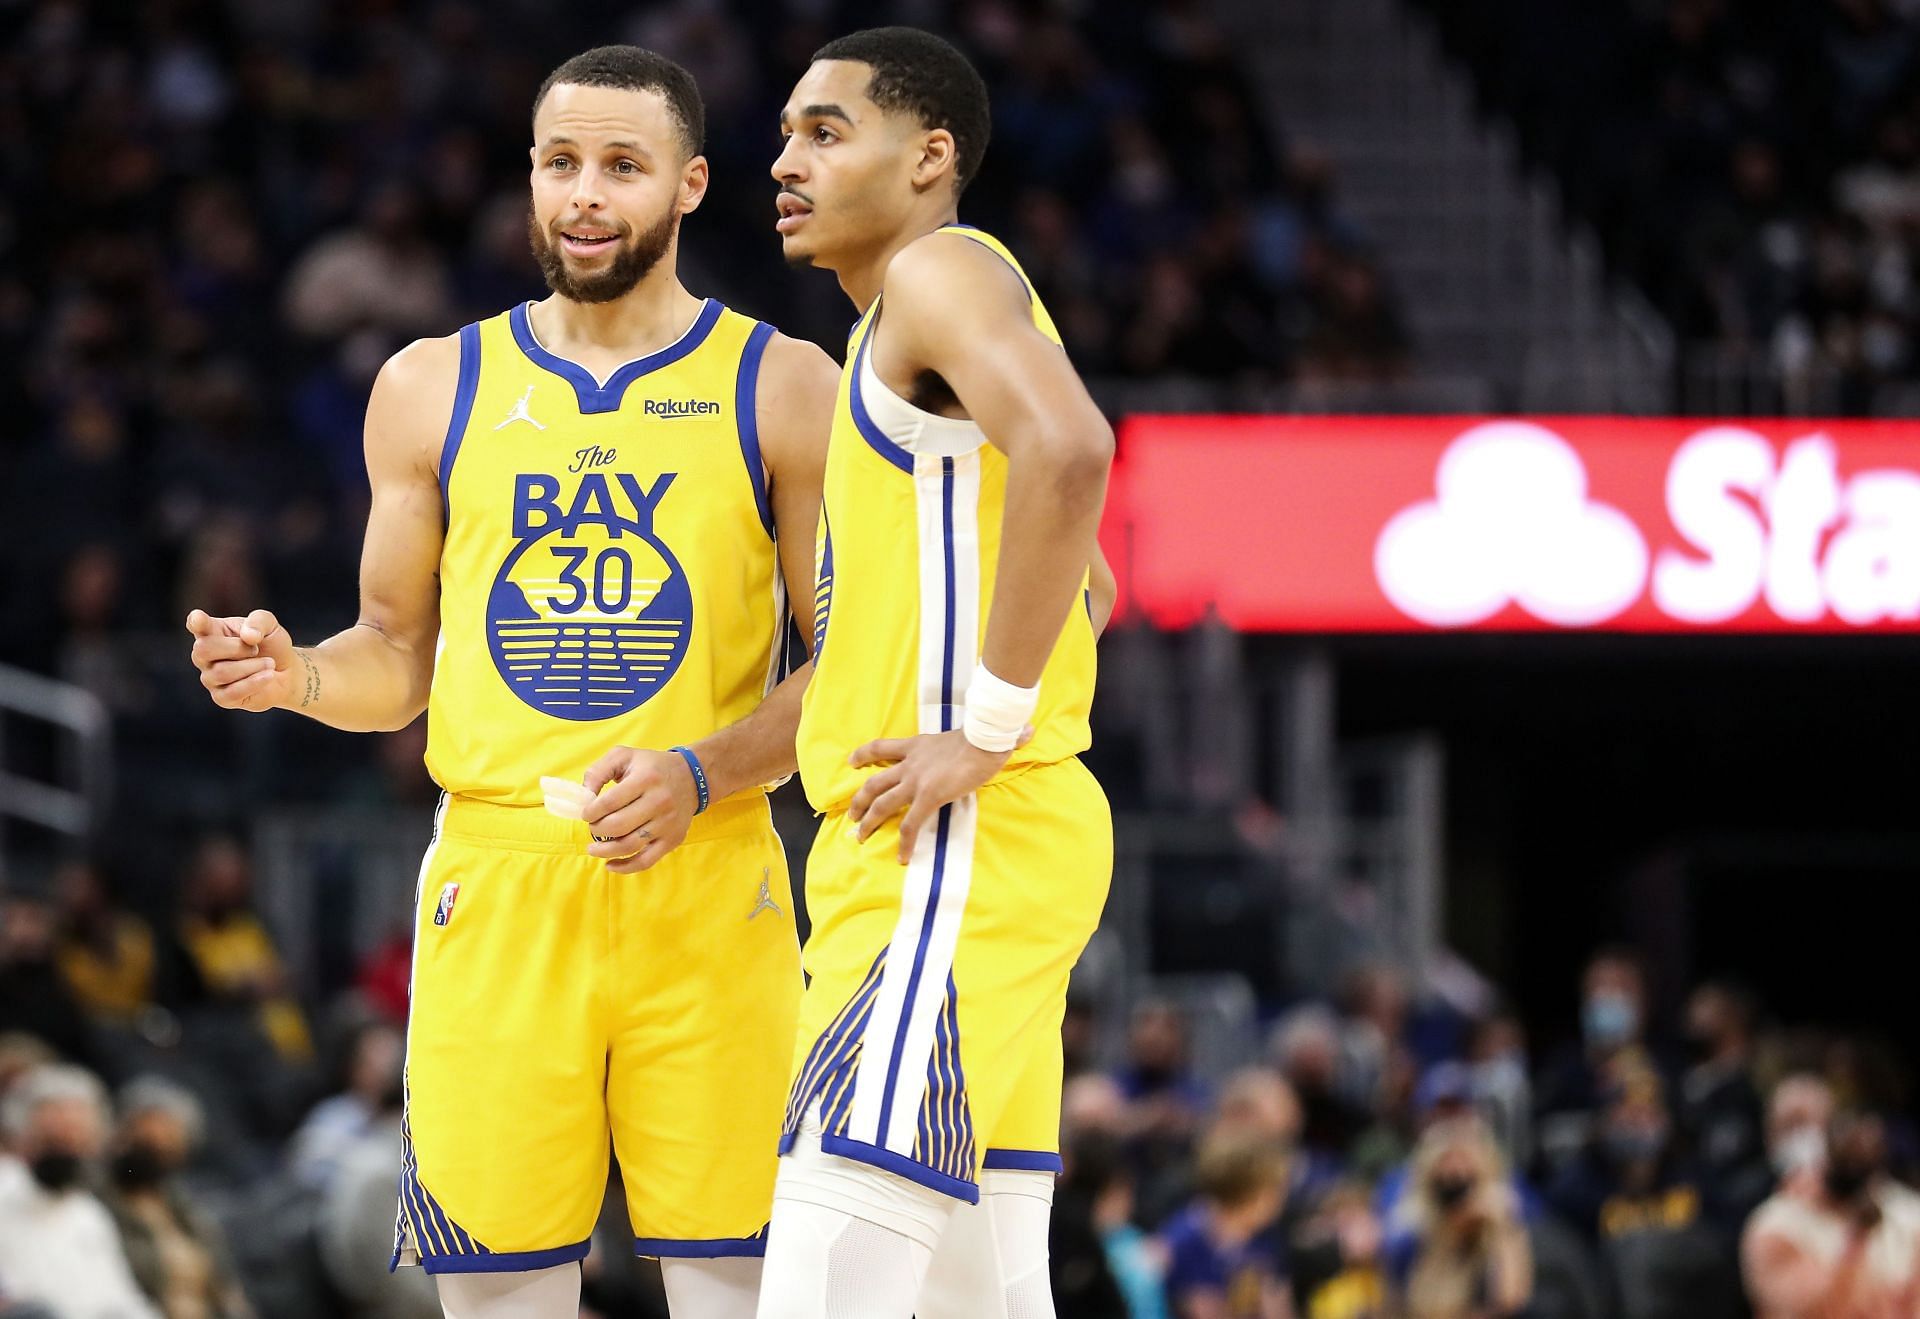 Steph Curry (left) and Jordan Poole of the Golden State Warriors